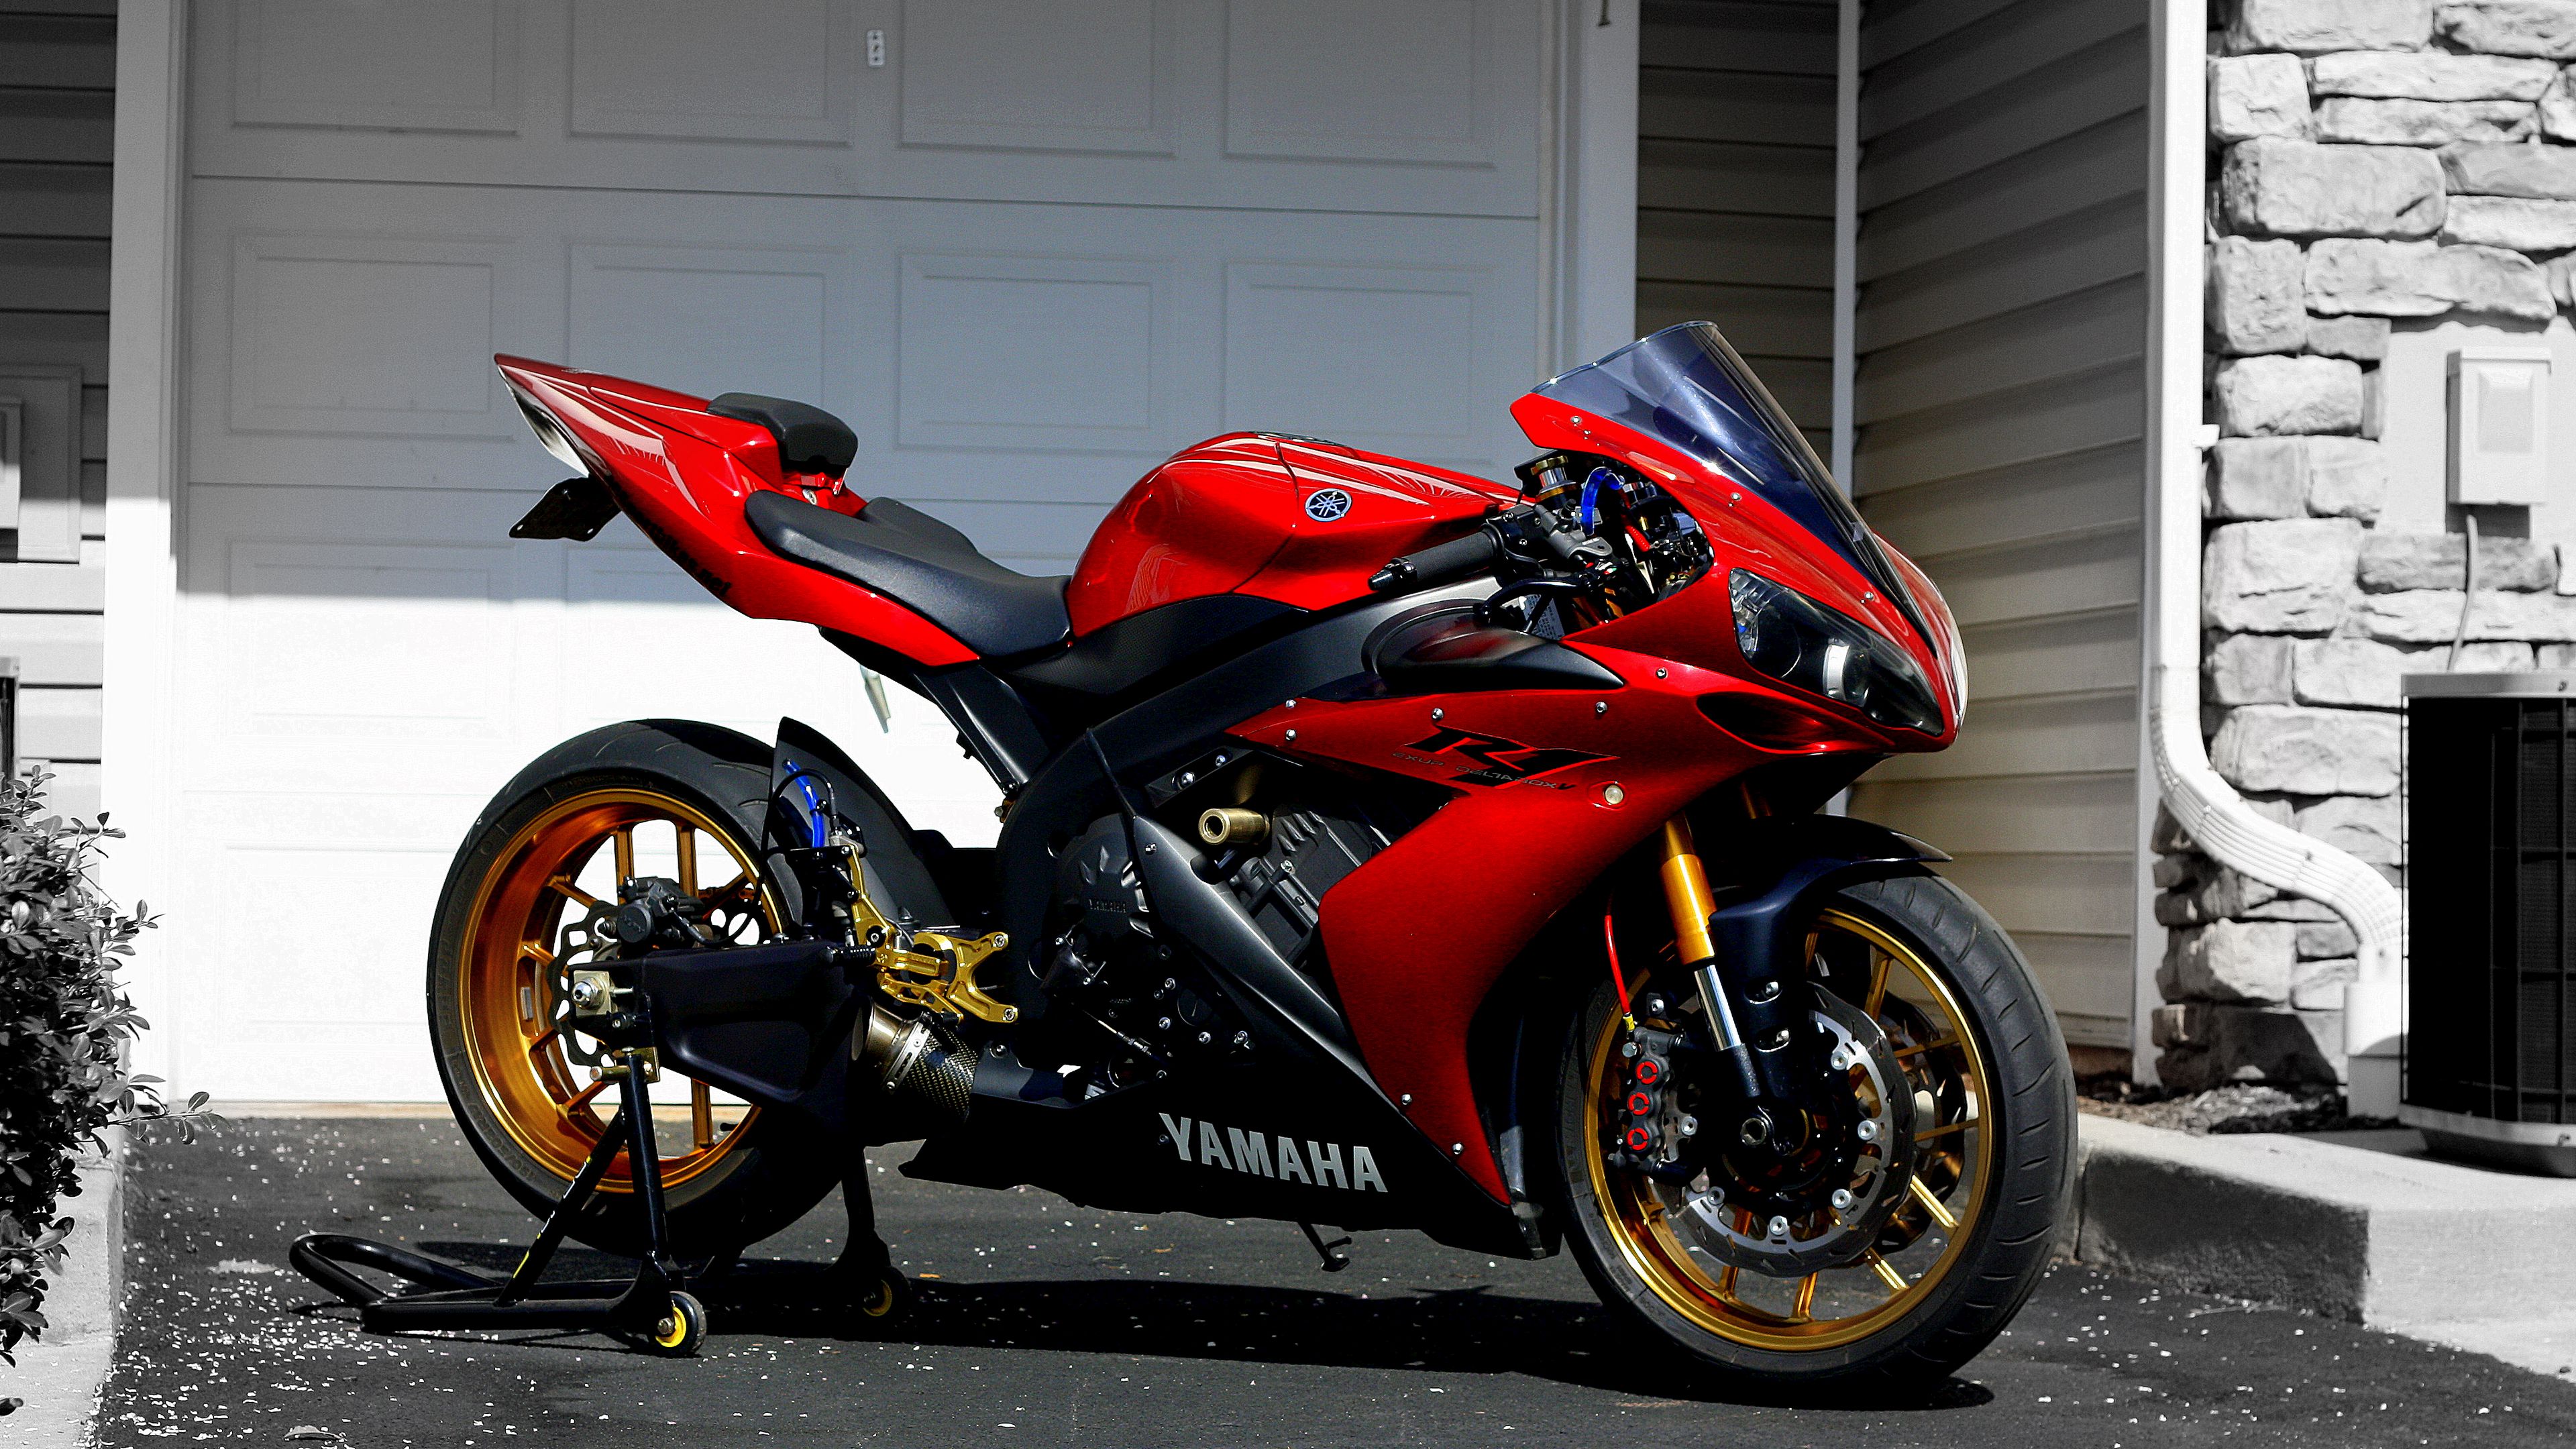 Yamaha YZF-R7 Motorbike Wallpapers For Phone